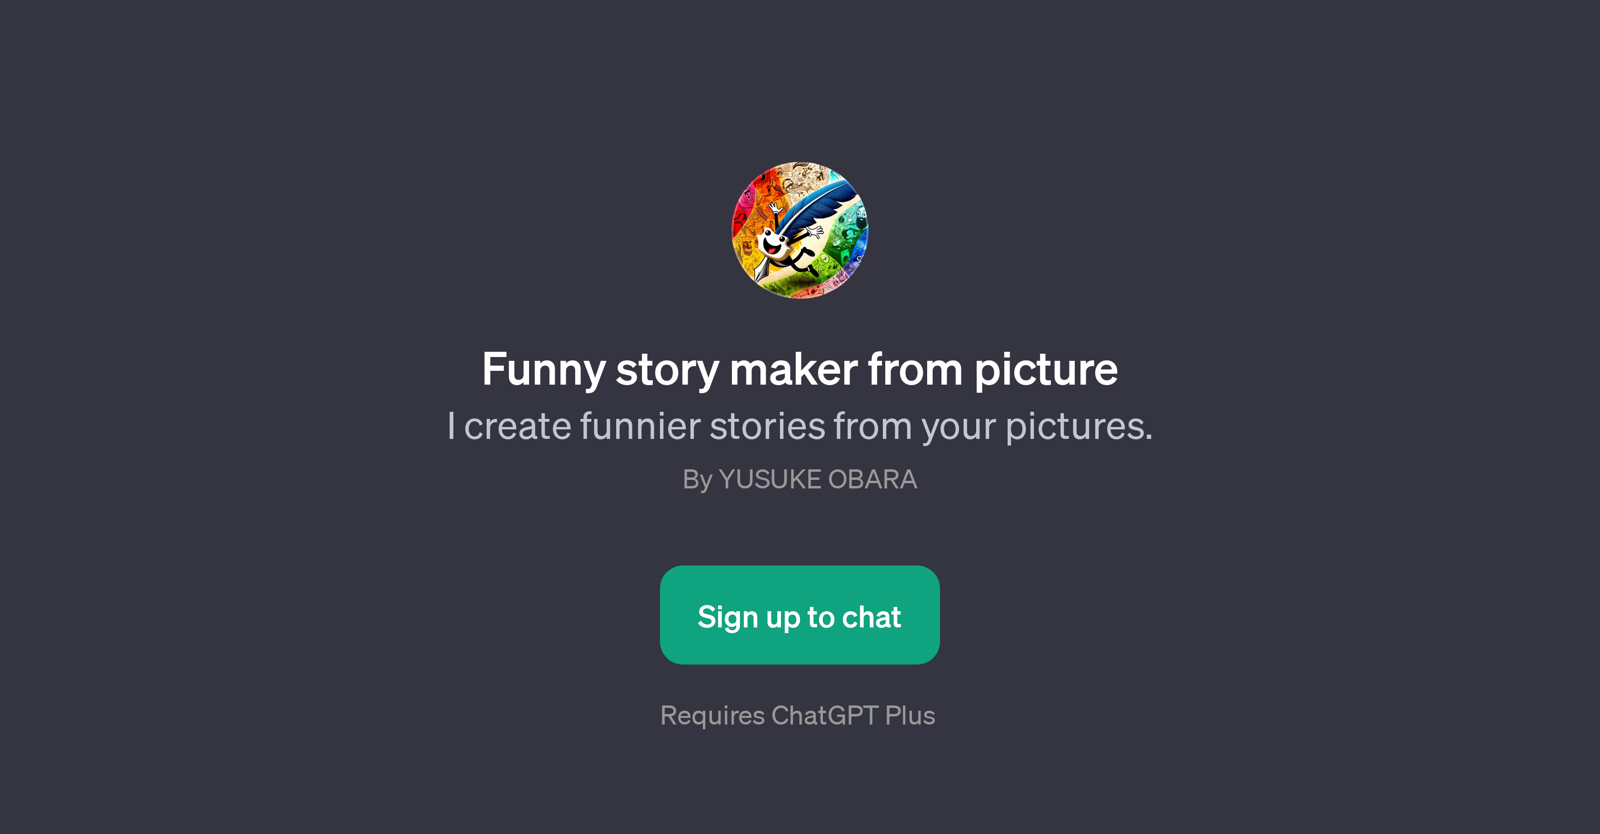 Funny story maker from picture website